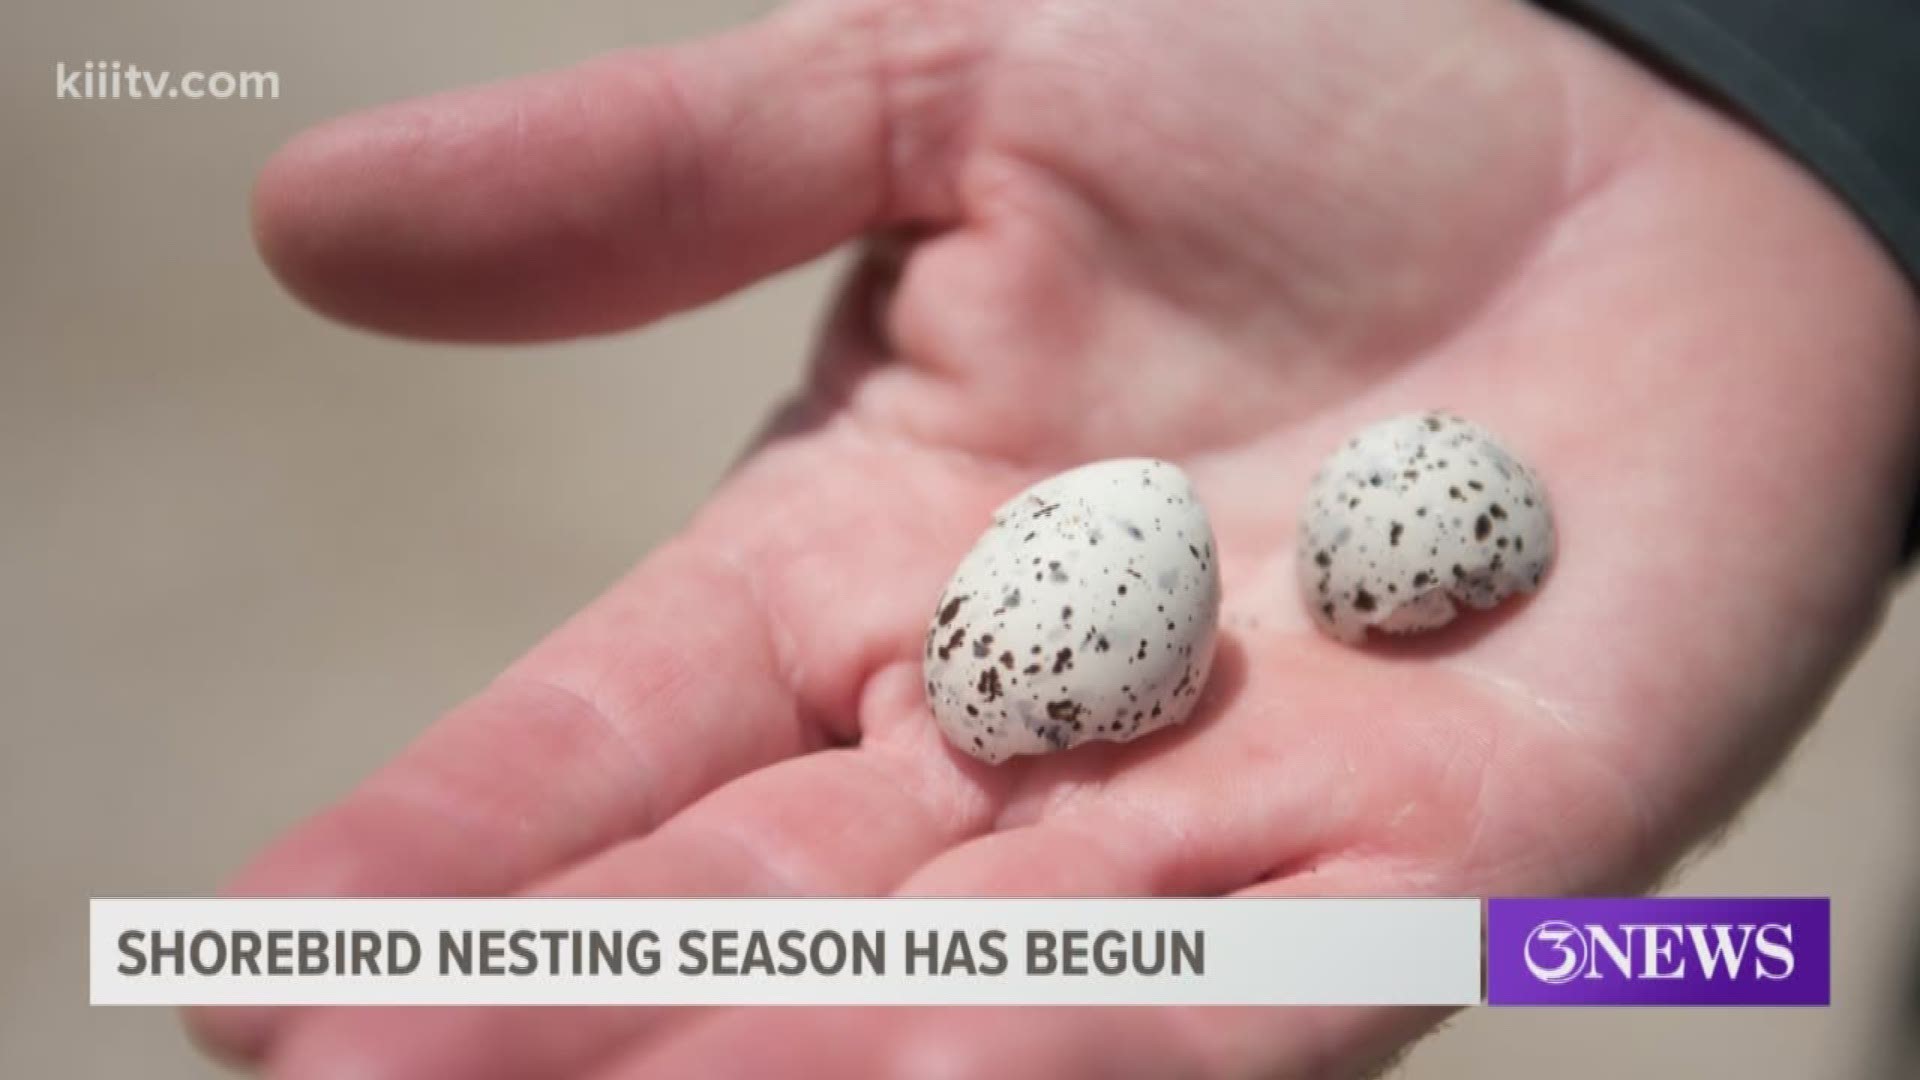 David Newstead, the Director of Coastal Bend Bays and Estuaries Program, says you can easily scare nesting birds away from the area, leaving their hatchlings to die.